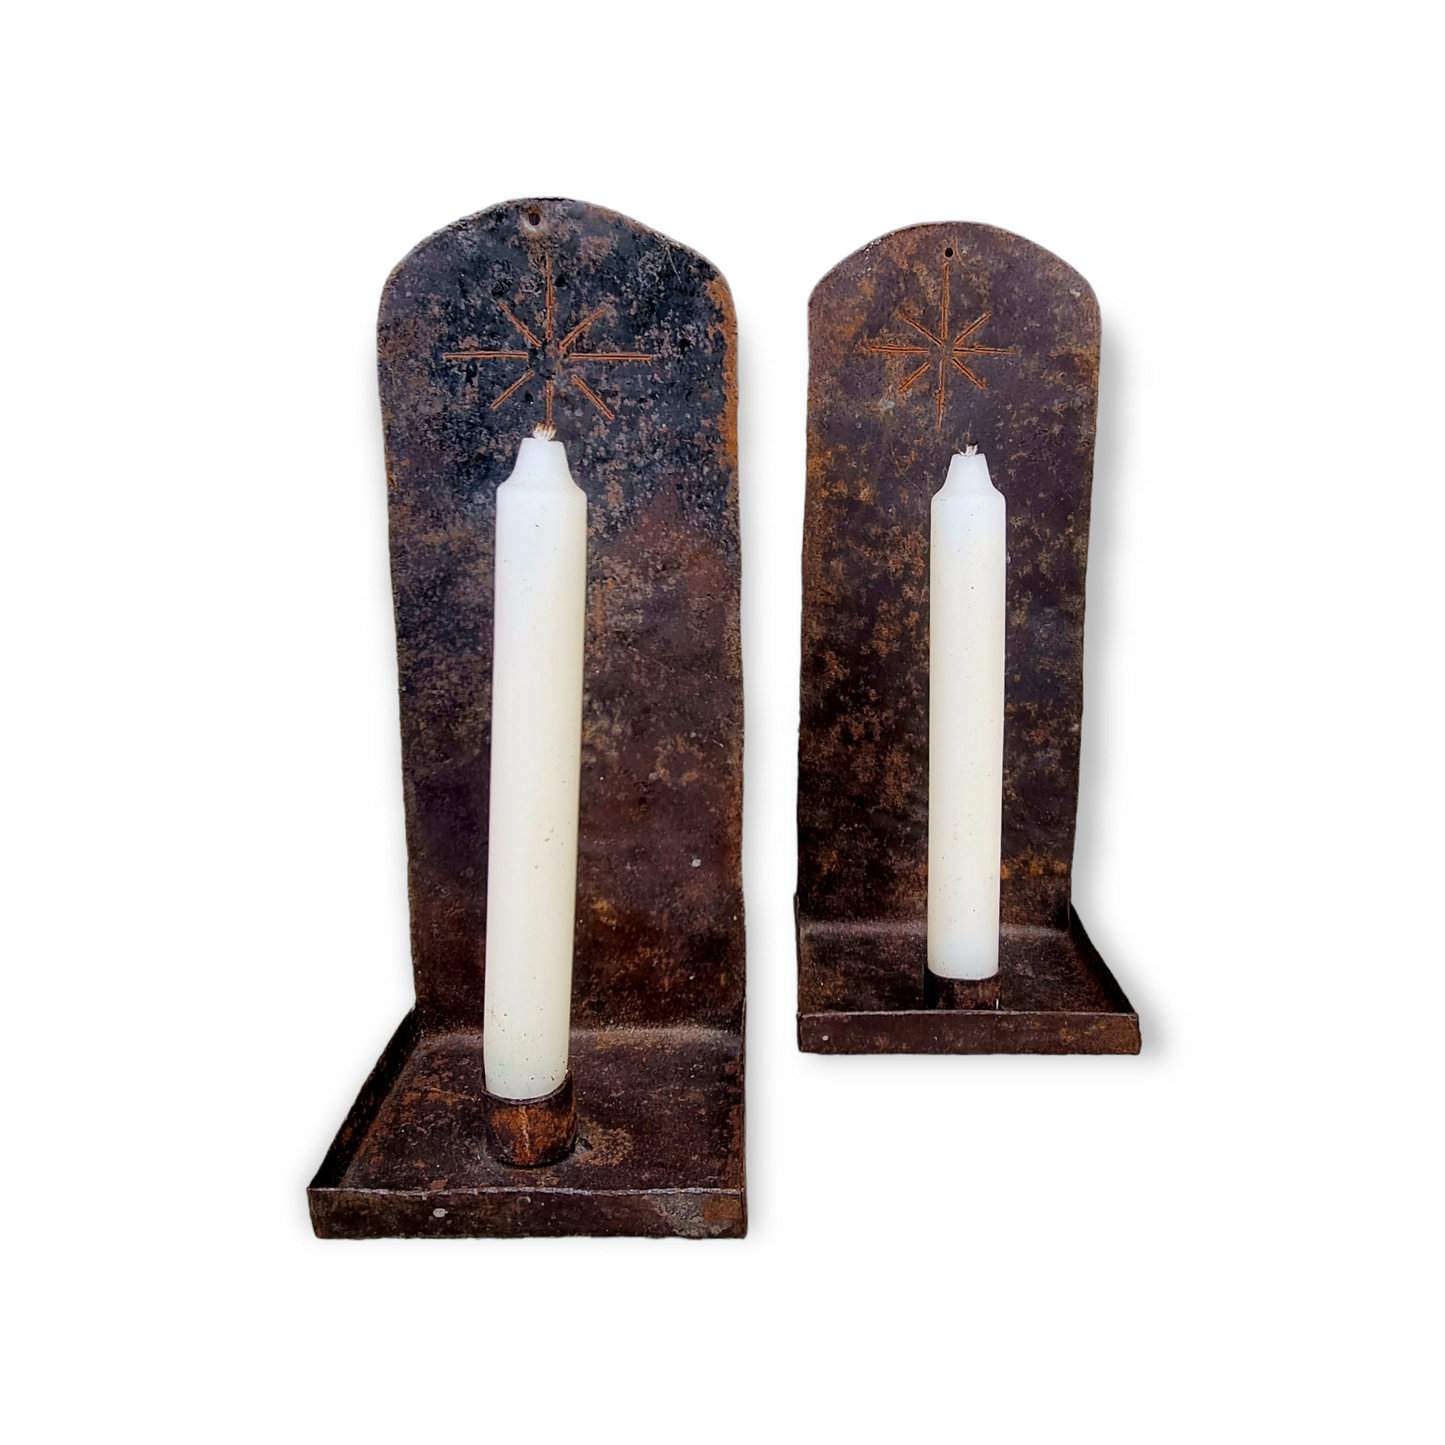 Pair of Early 19th Century American Antique Toleware Wall Sconces